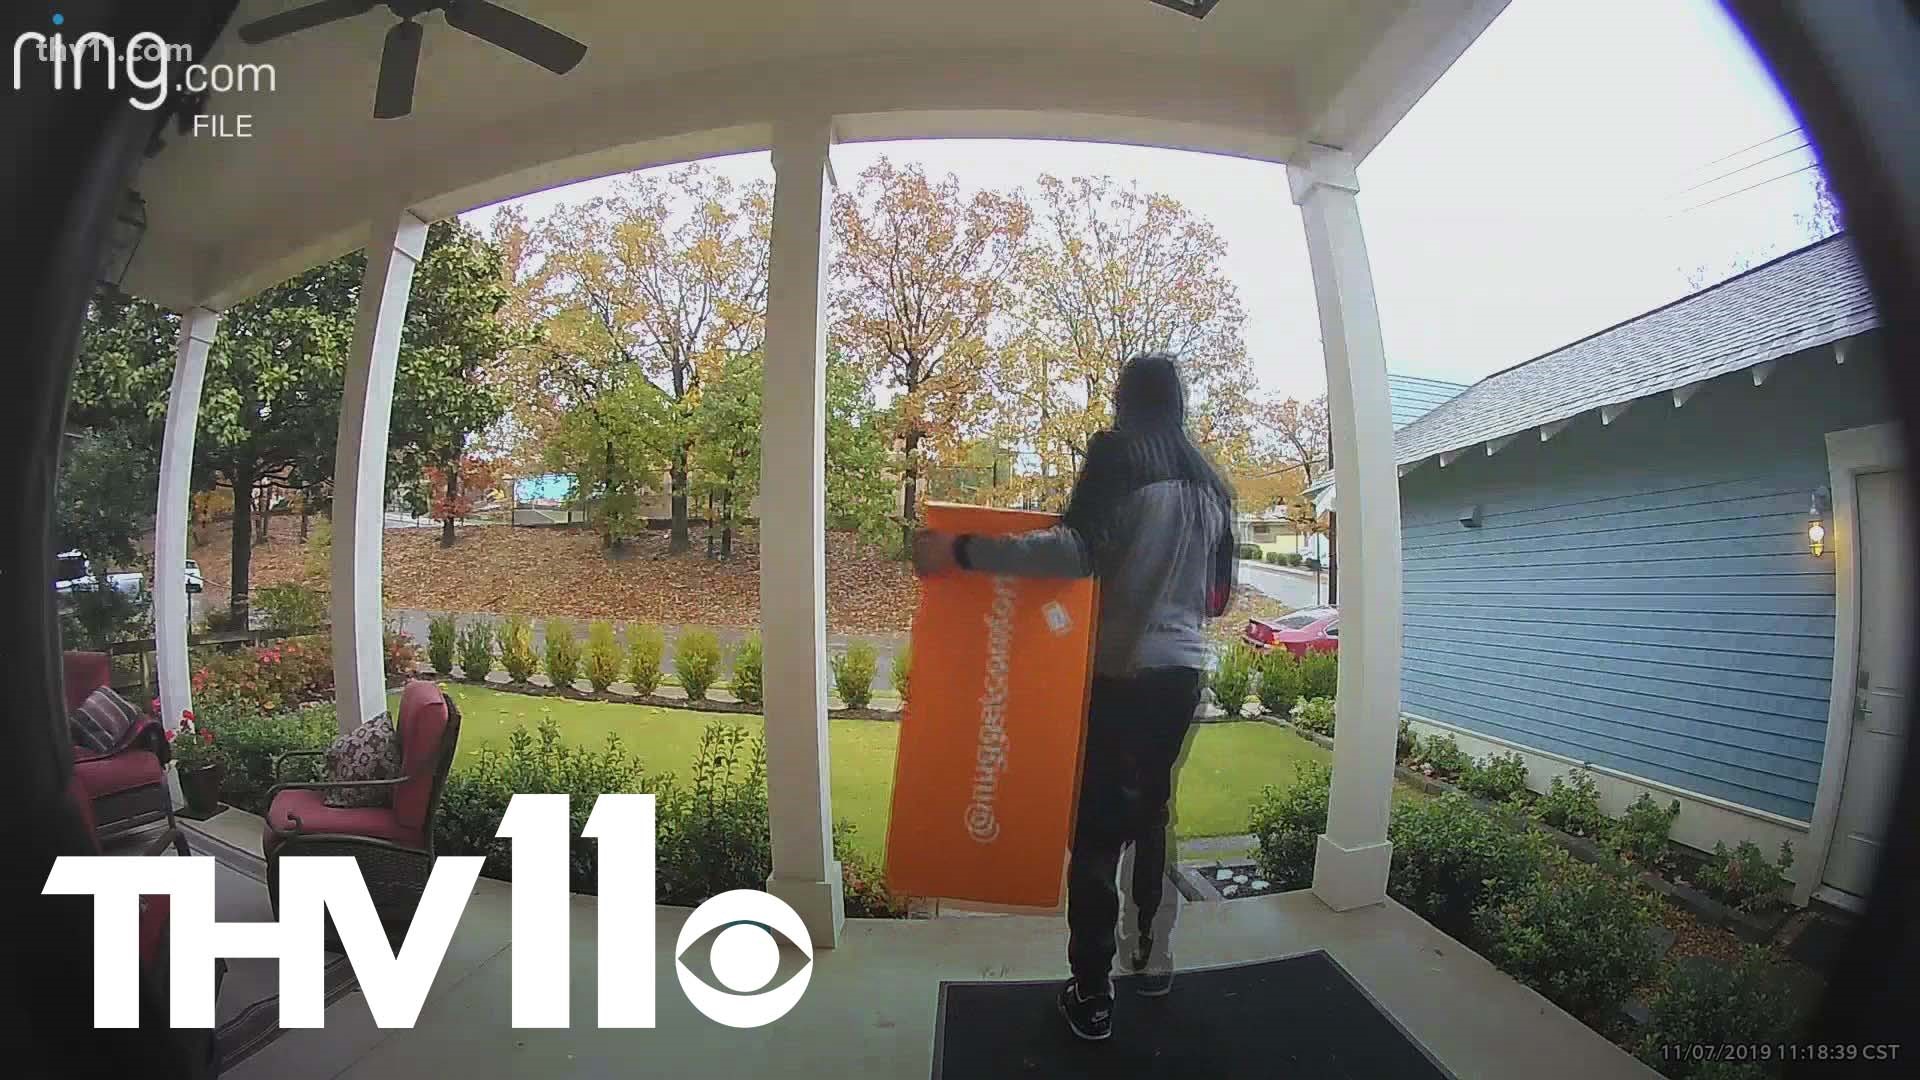 Police shared some advice on how you can protect yourself from porch pirates and stolen packages after seeing a rise during the holiday shopping season.